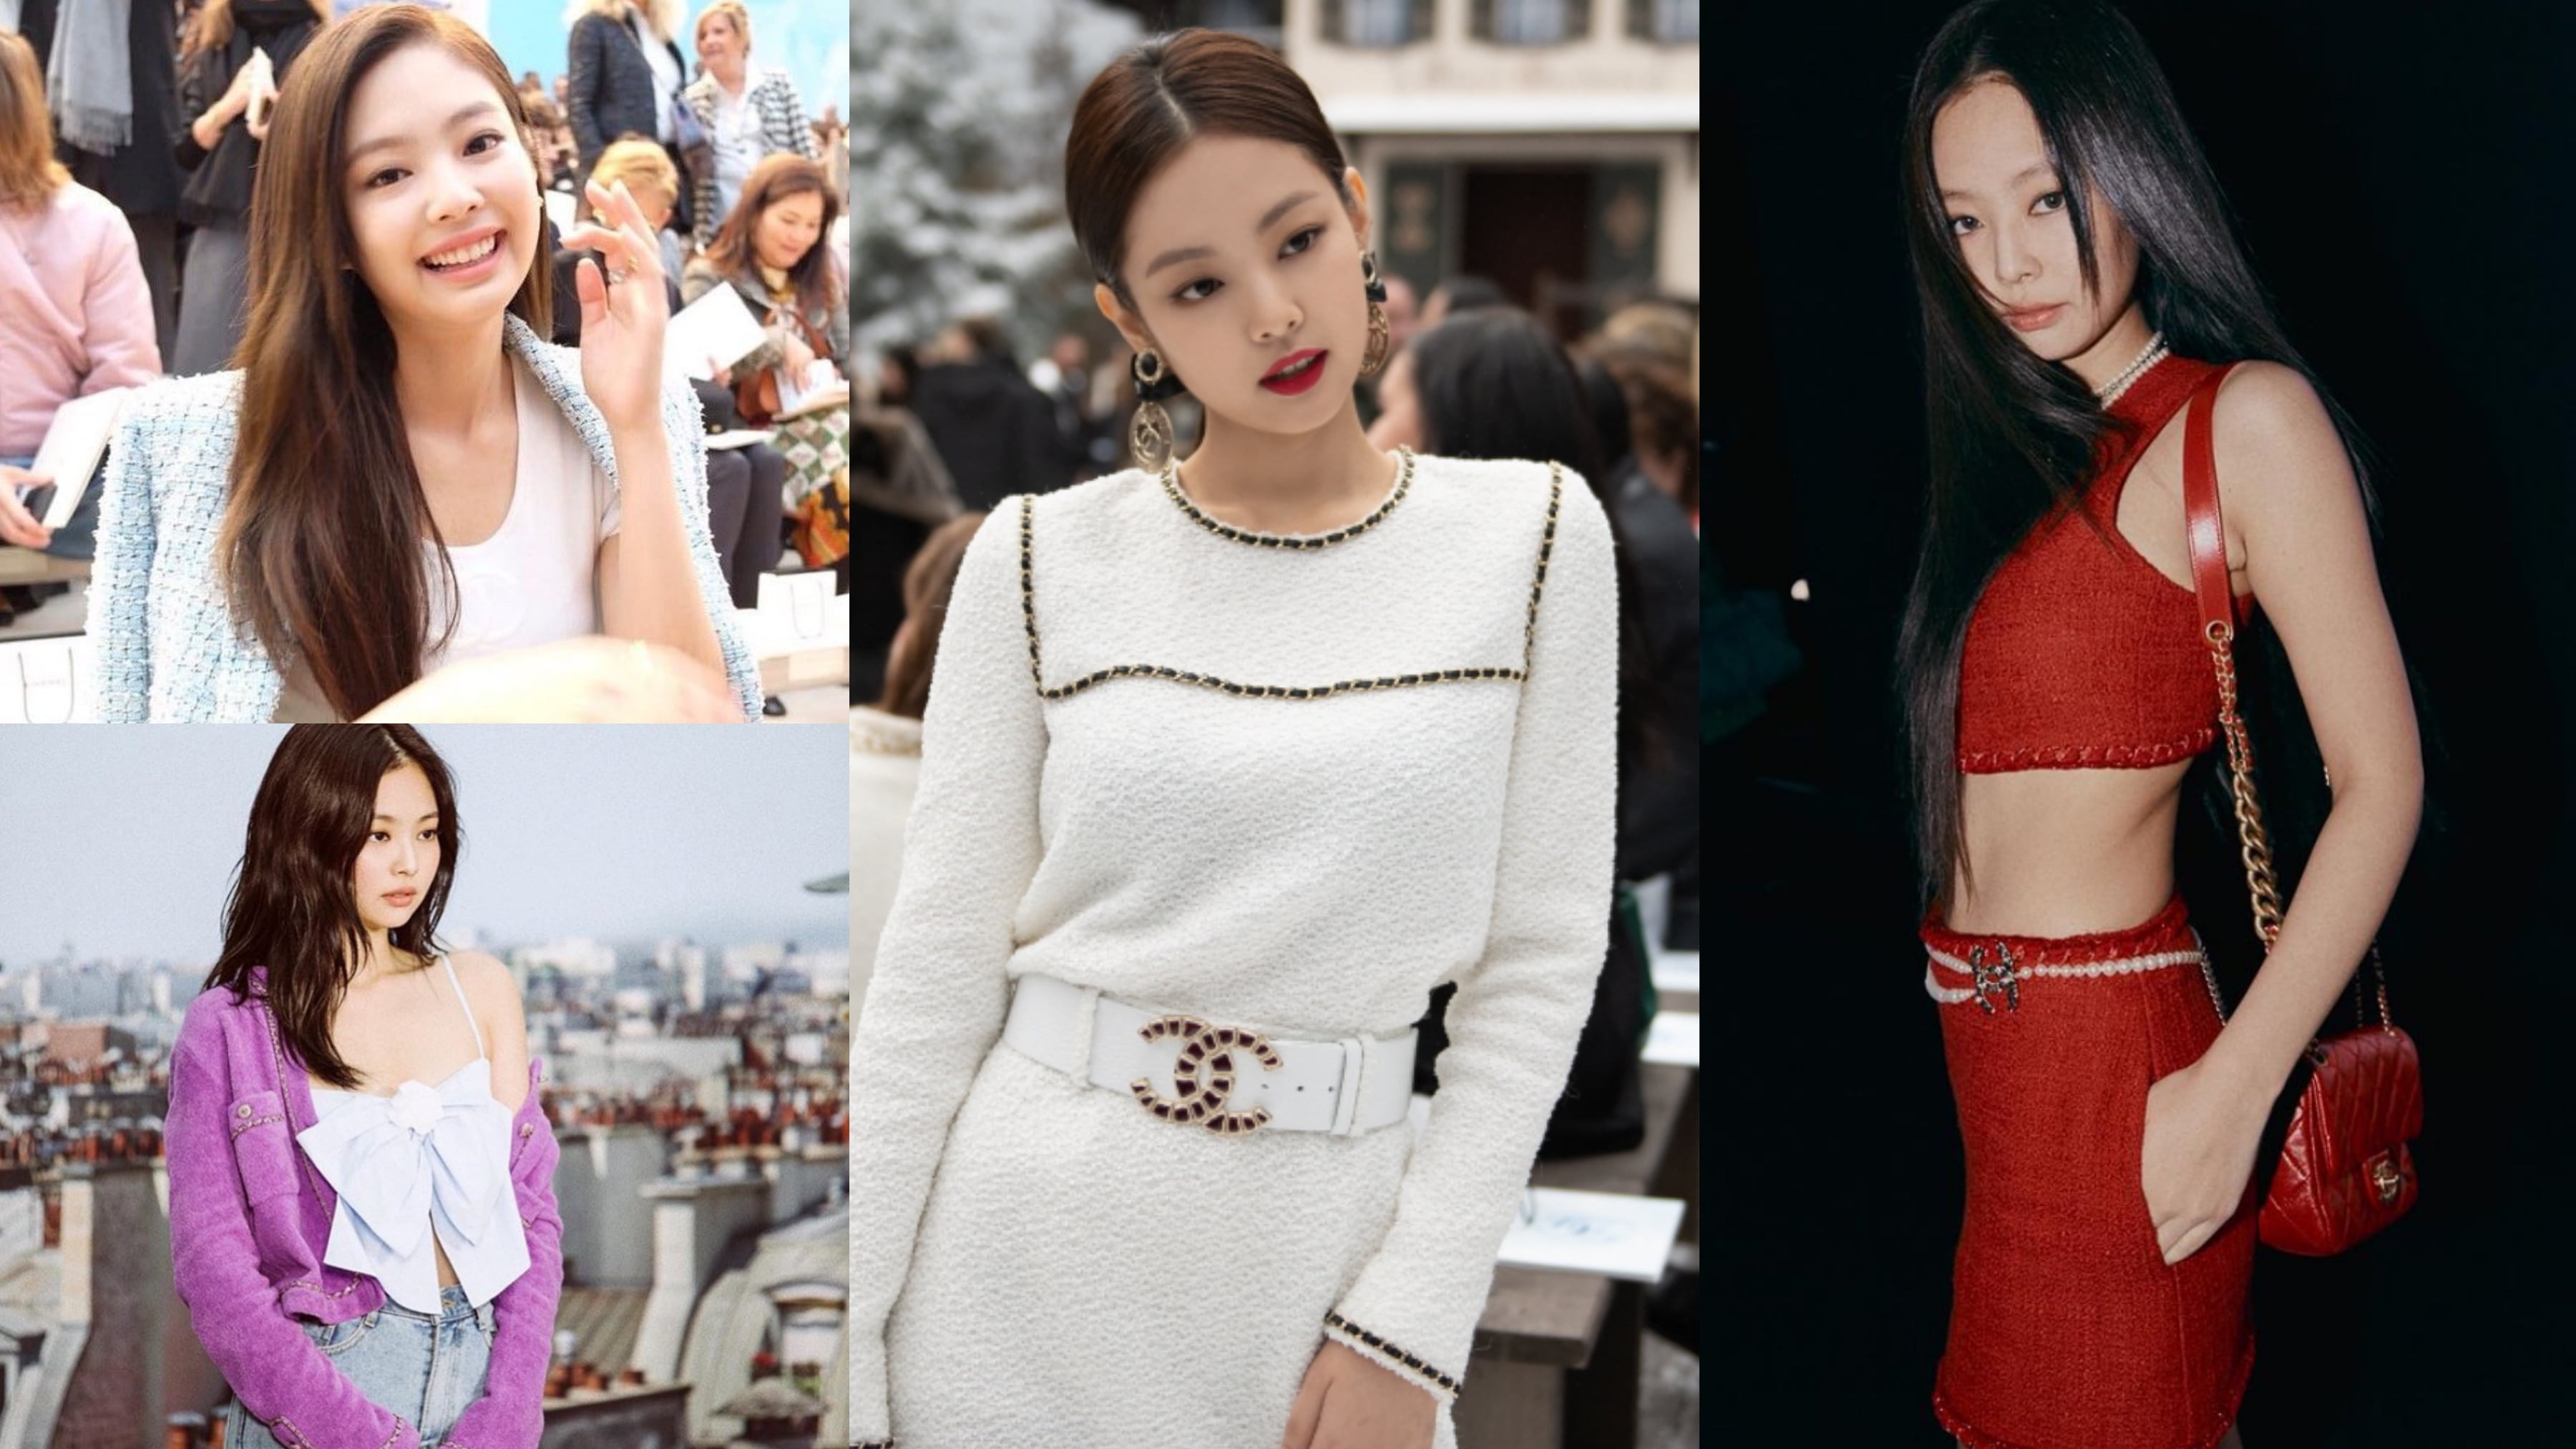 Super chic jennie attended chanel's show